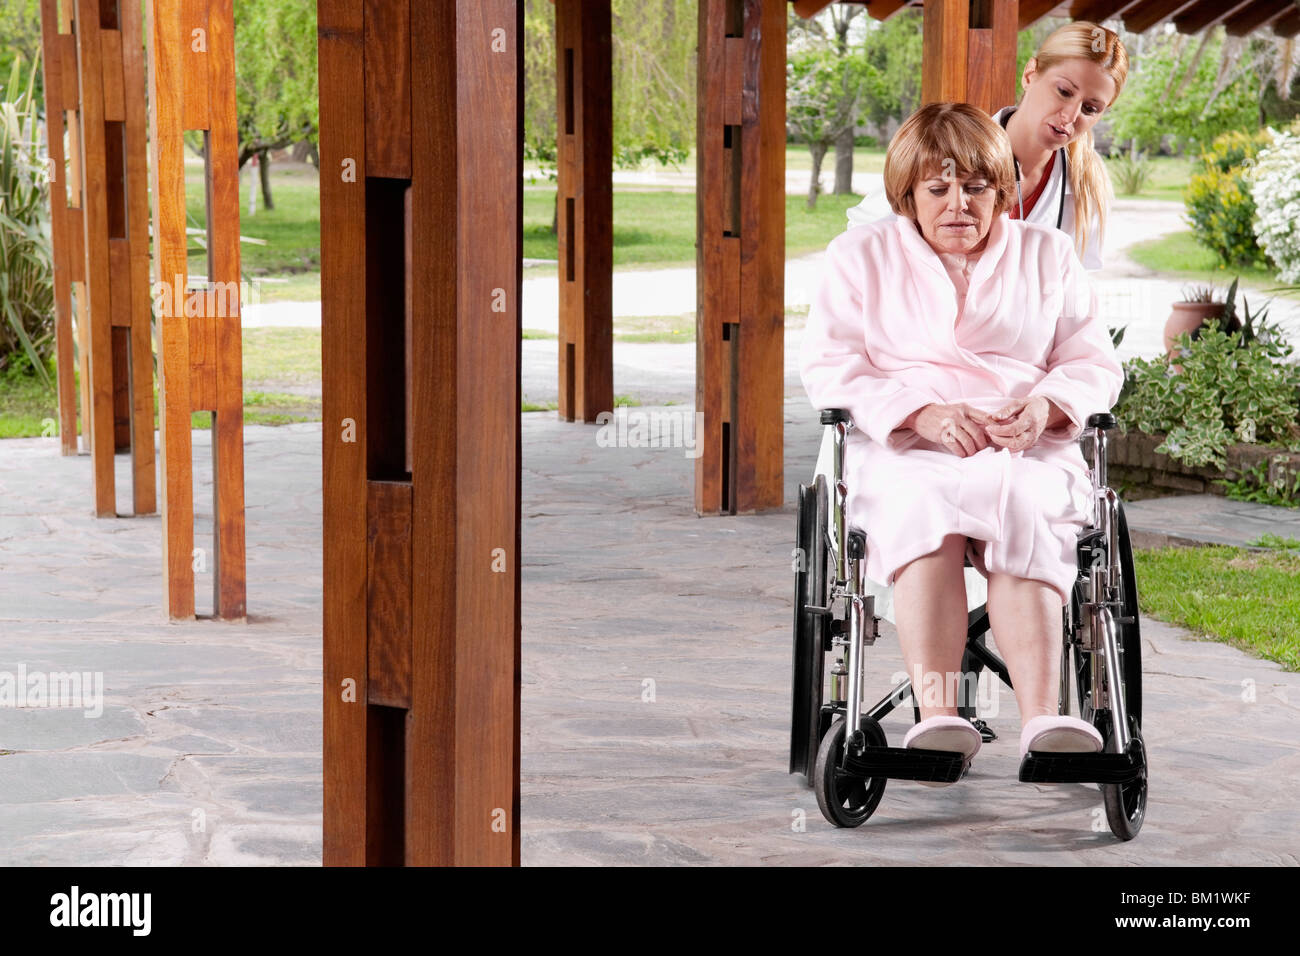 Doctor pushing a patient sitting in a wheelchair Stock Photo